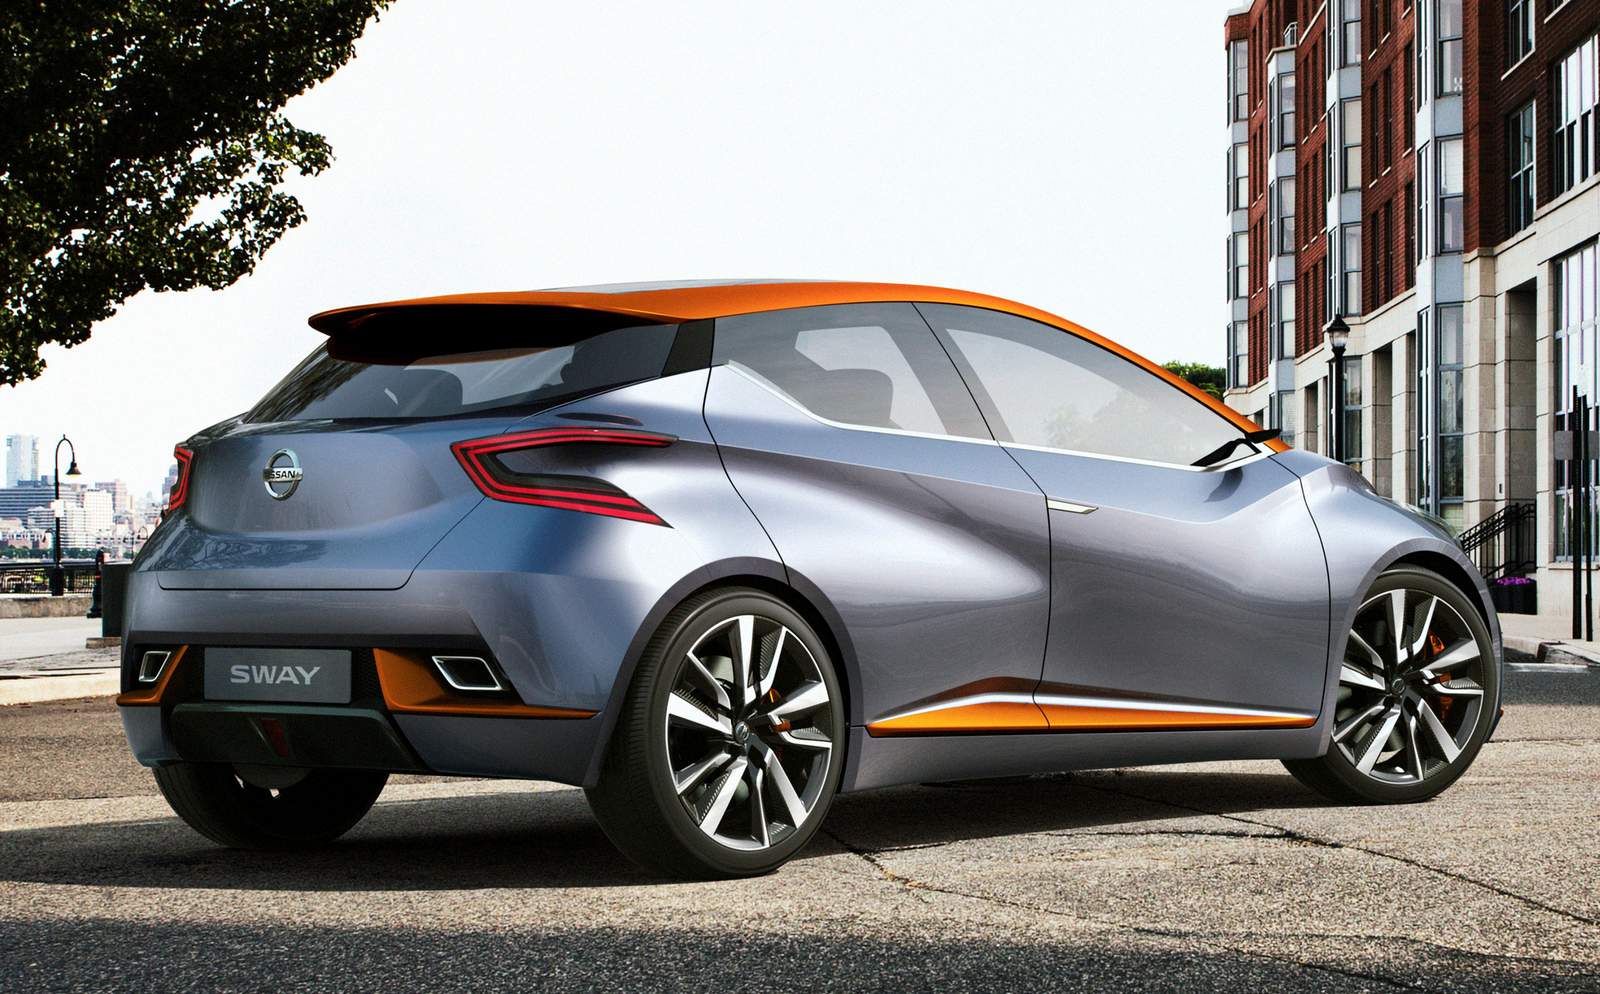 Nissan Sway - New March